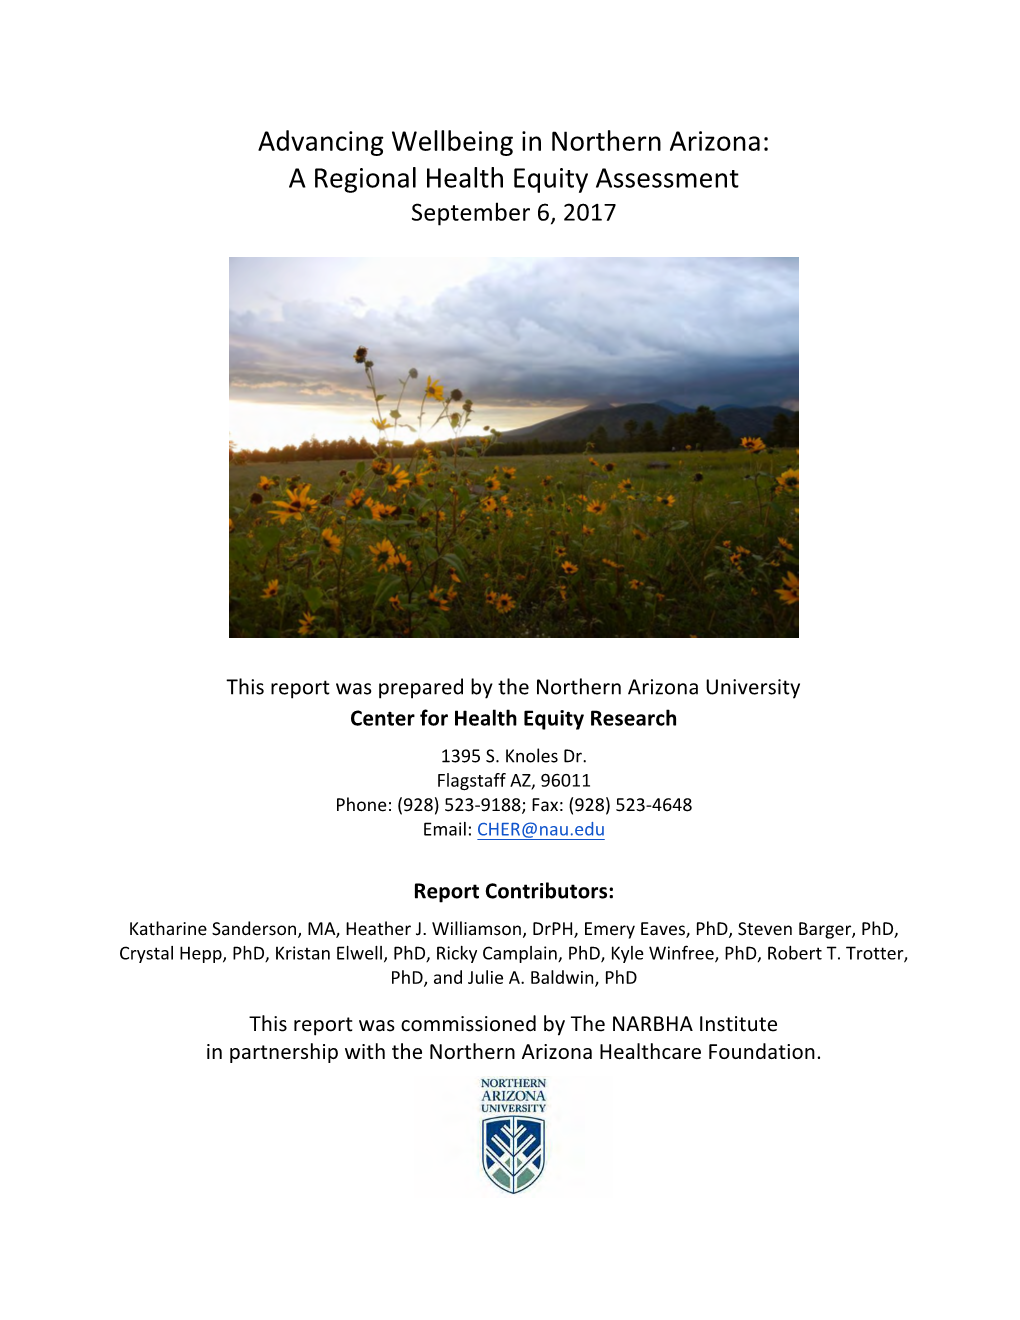 Advancing Wellbeing in Northern Arizona: a Regional Health Equity Assessment September 6, 2017